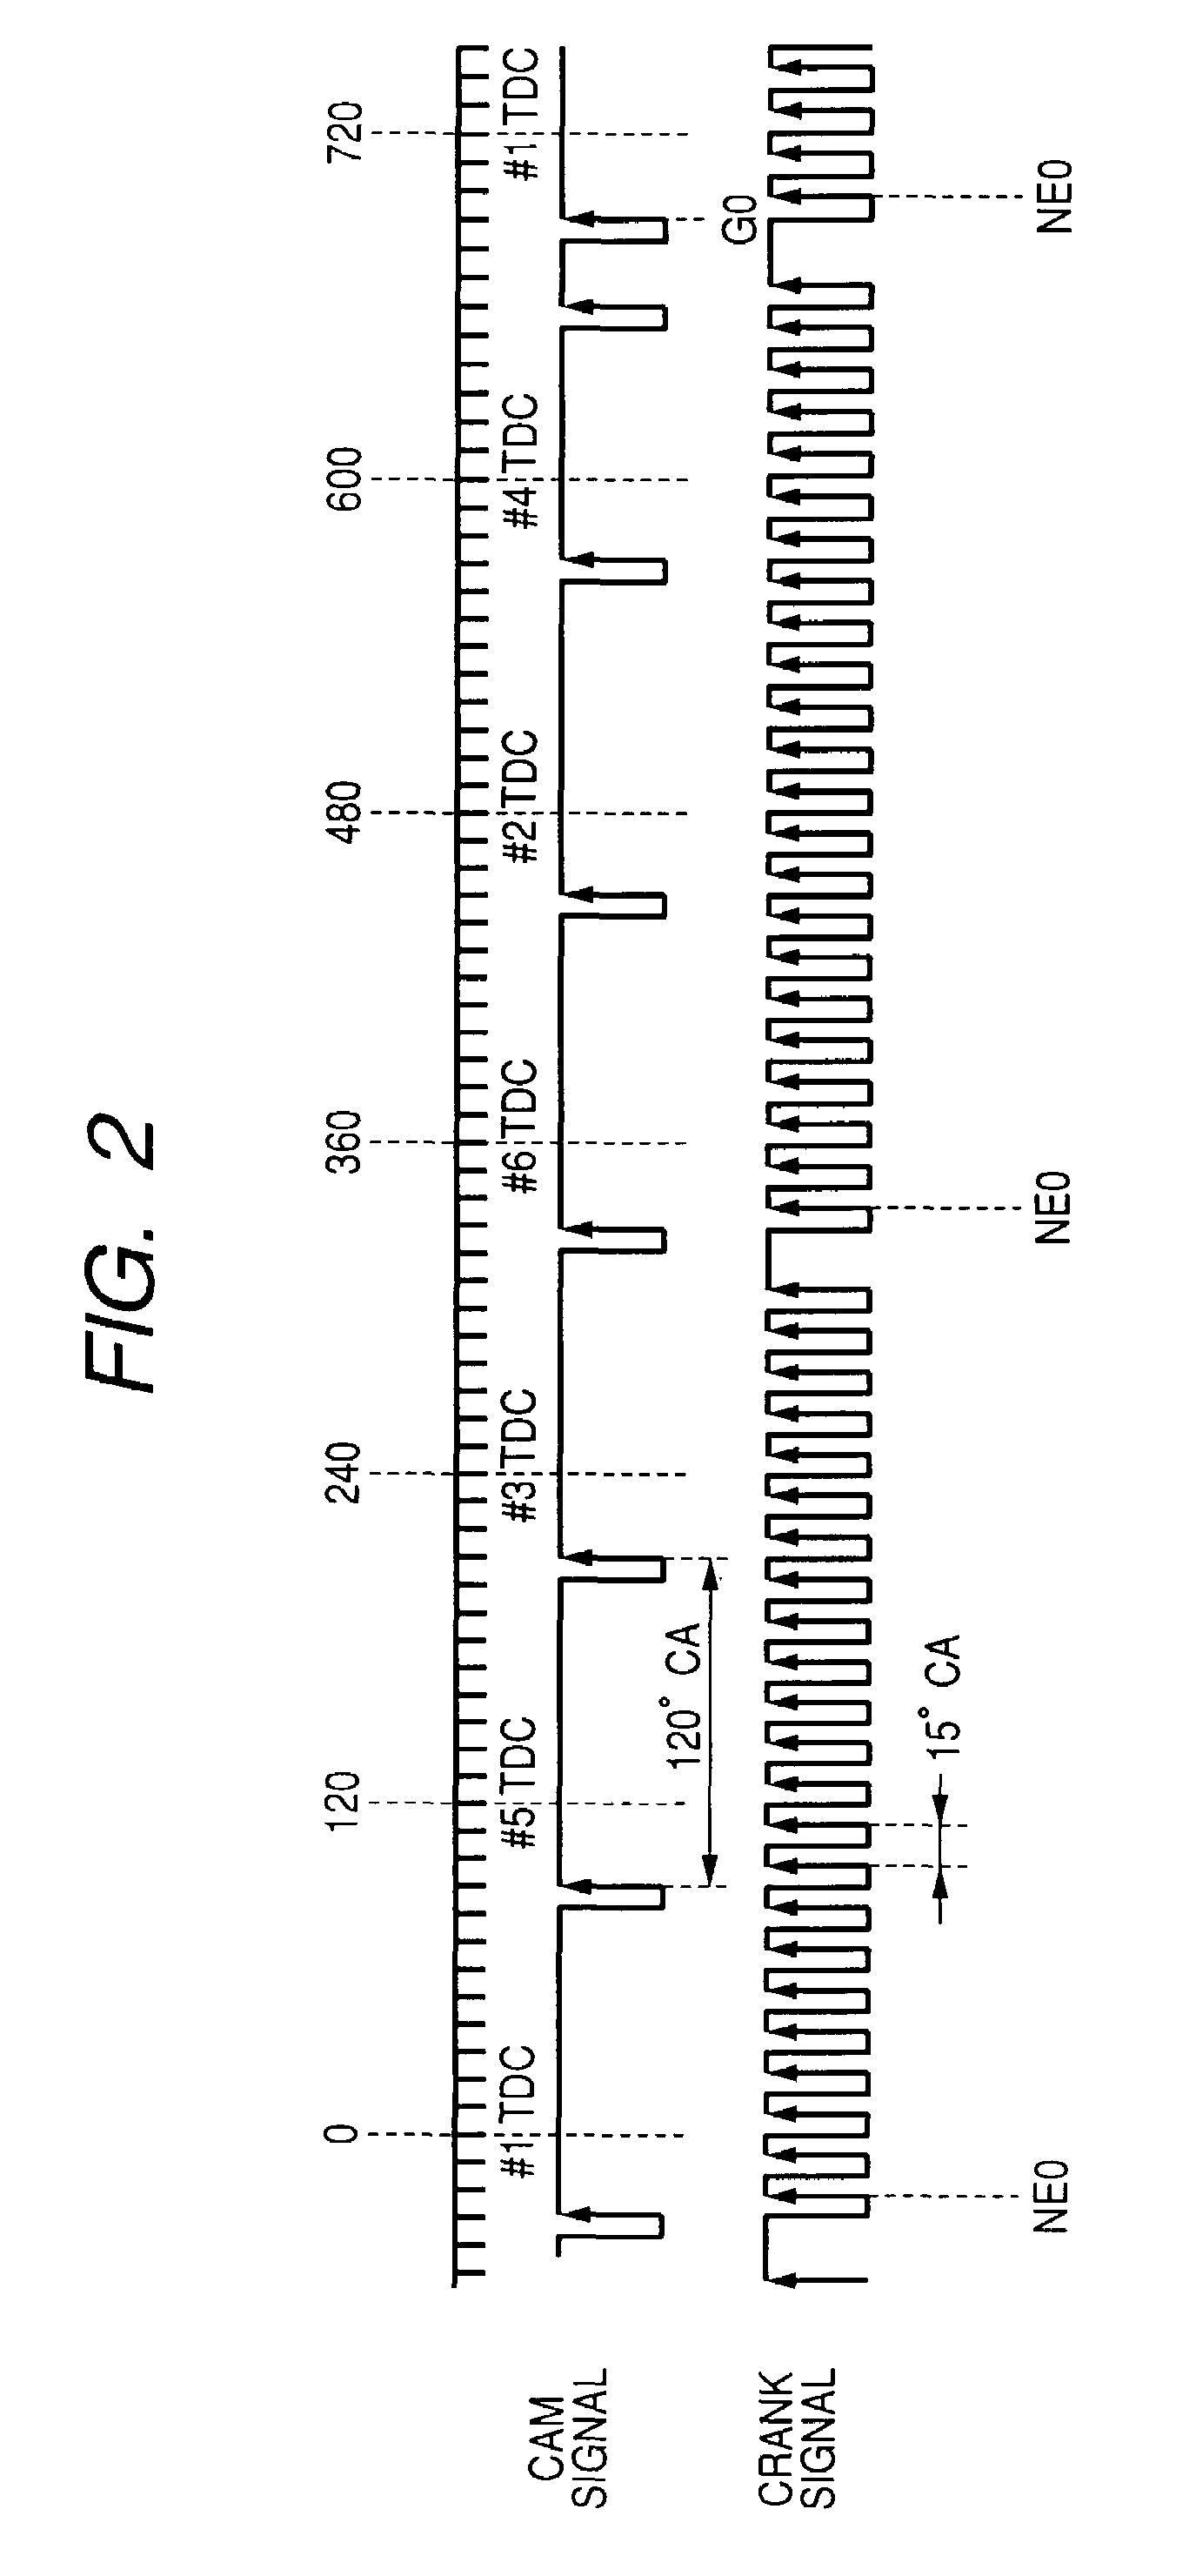 Engine control apparatus and related engine control method